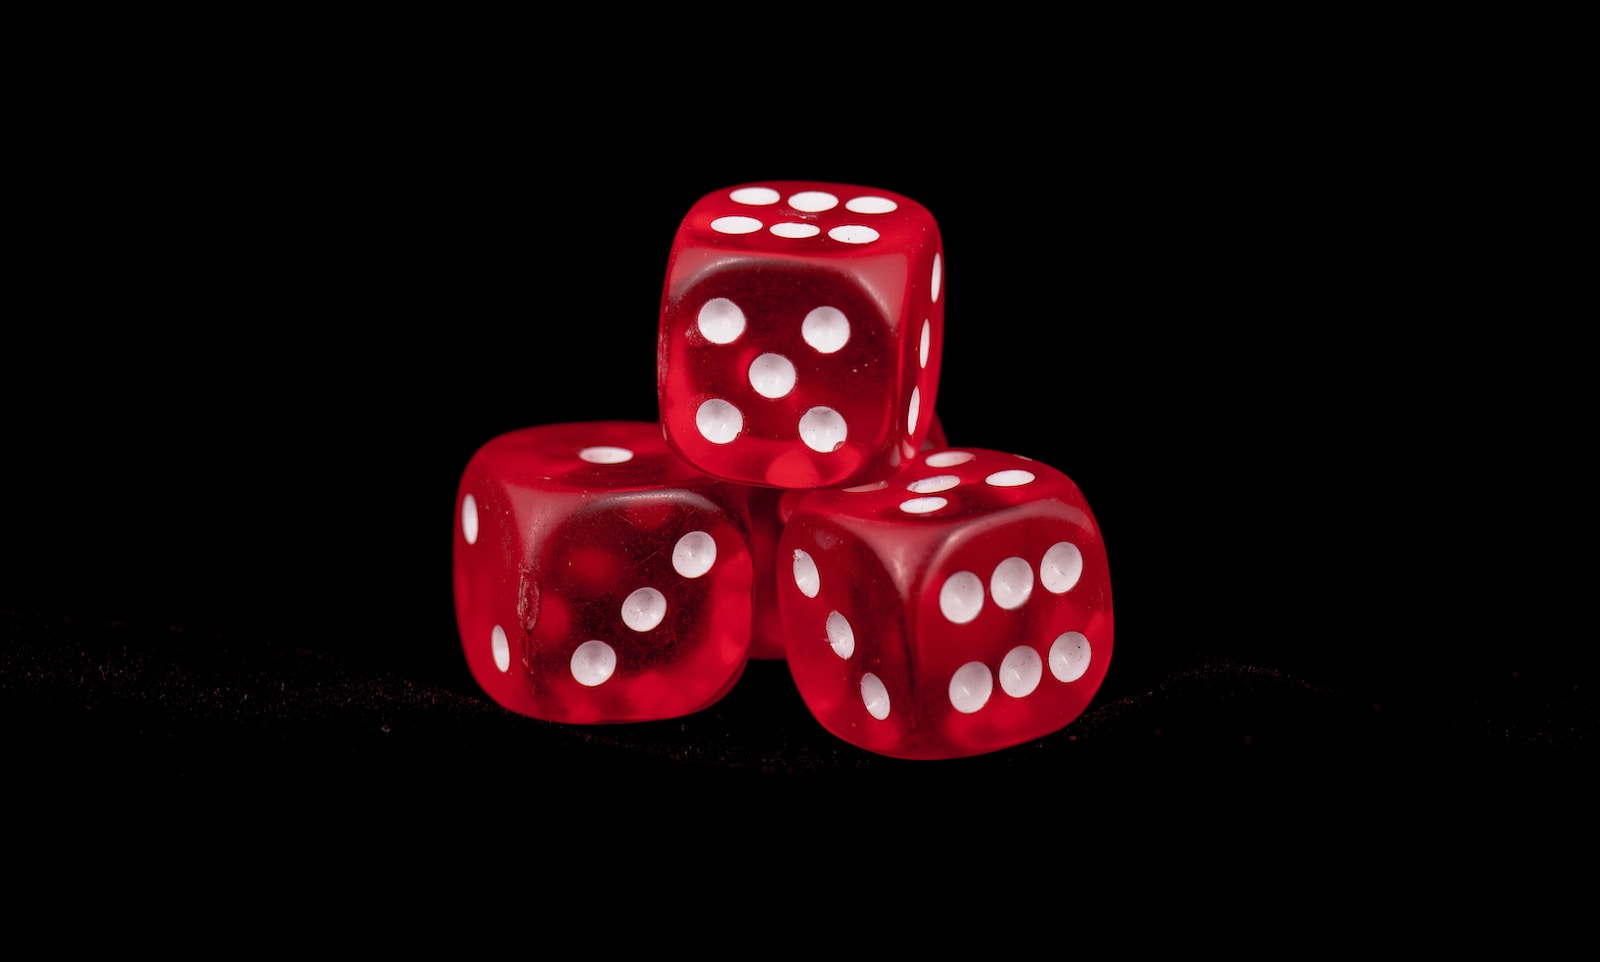 3 red dice